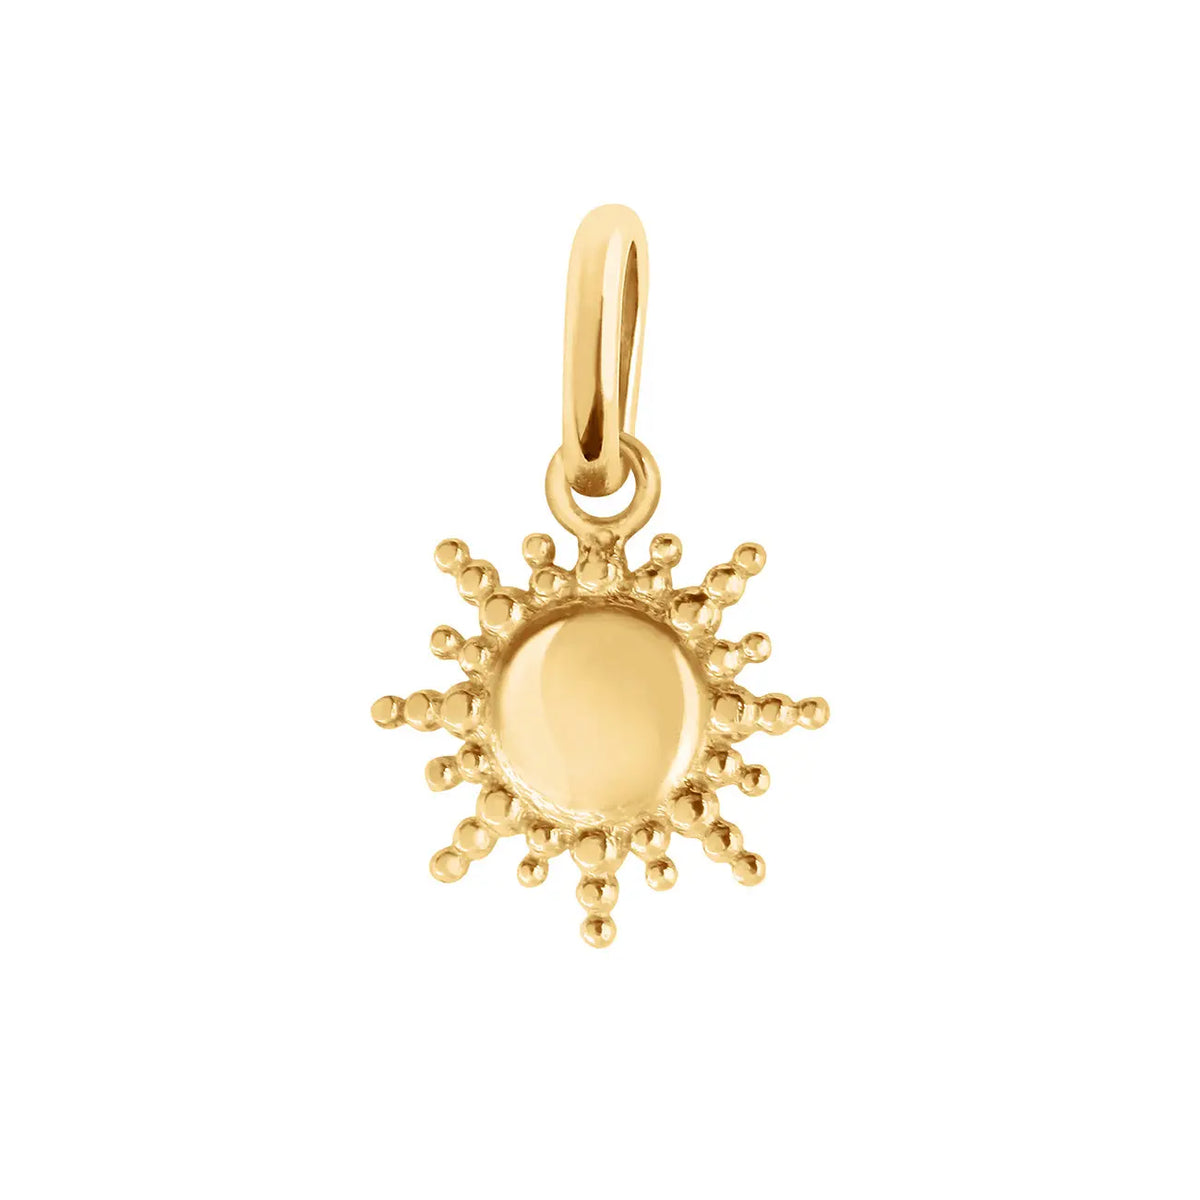 The Sun gold pendant by gigi CLOZEAU is a playful yet sophisticated take on our voyage through life. This striking piece features 18k gold and a timeless design to capture a sense of elegance.  Each jewel is unique, artisanally made in its family-owned workshop. The pendant mesures 0.4&quot; (with bail 0.6&quot;), pendant sold without chain.